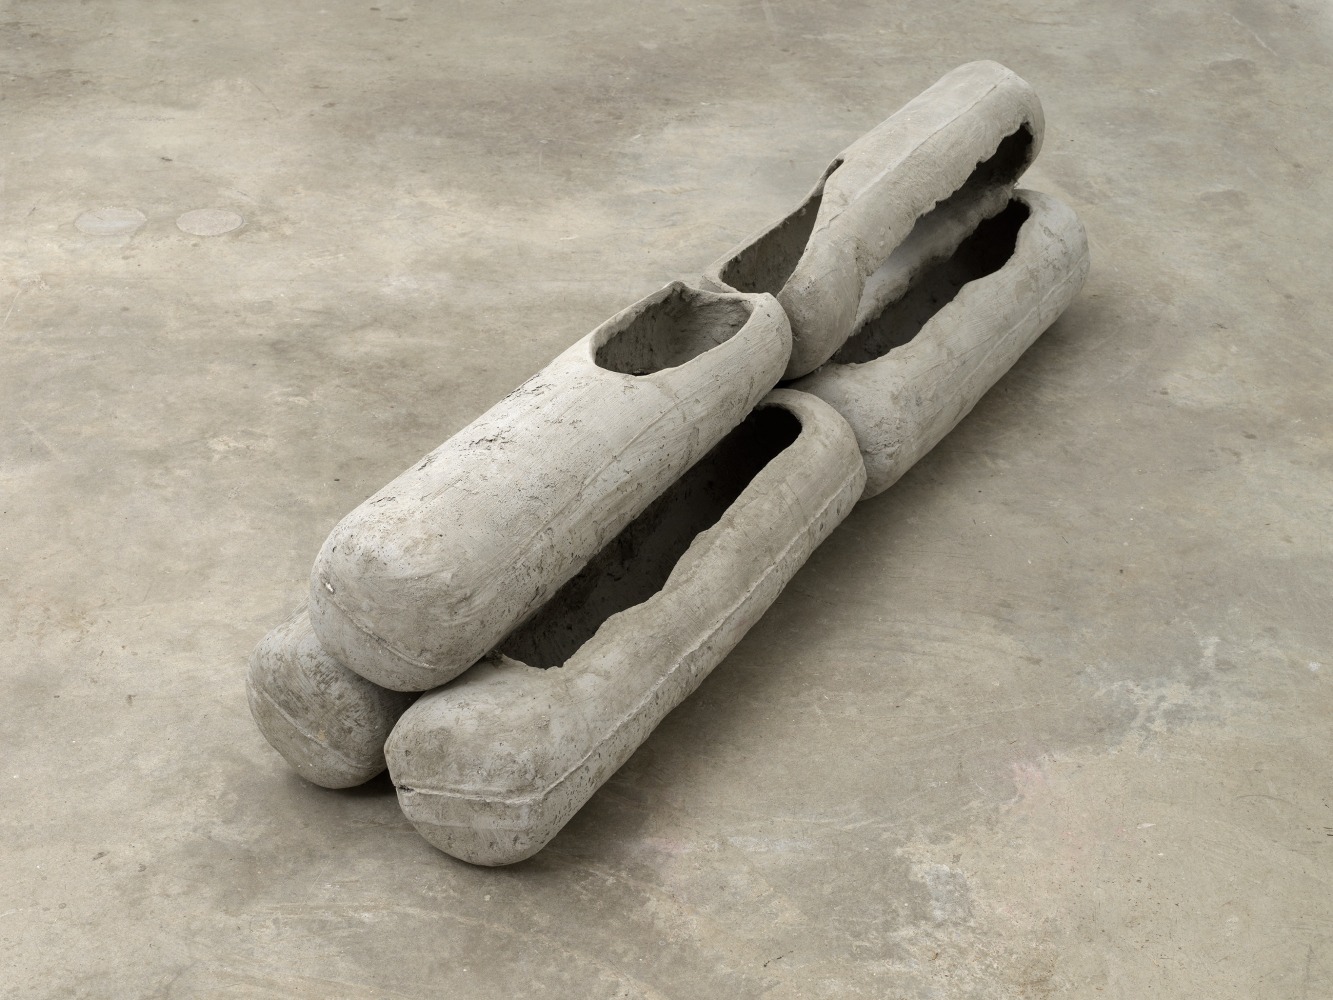 Mire Lee (b. 1988)

Horizontal Forms: cushions, 2020-2022 (ongoing)

Concrete

63 1/2 x 15 1/2 x 15 inches

38.1 x 39.4 x 161.3 cm